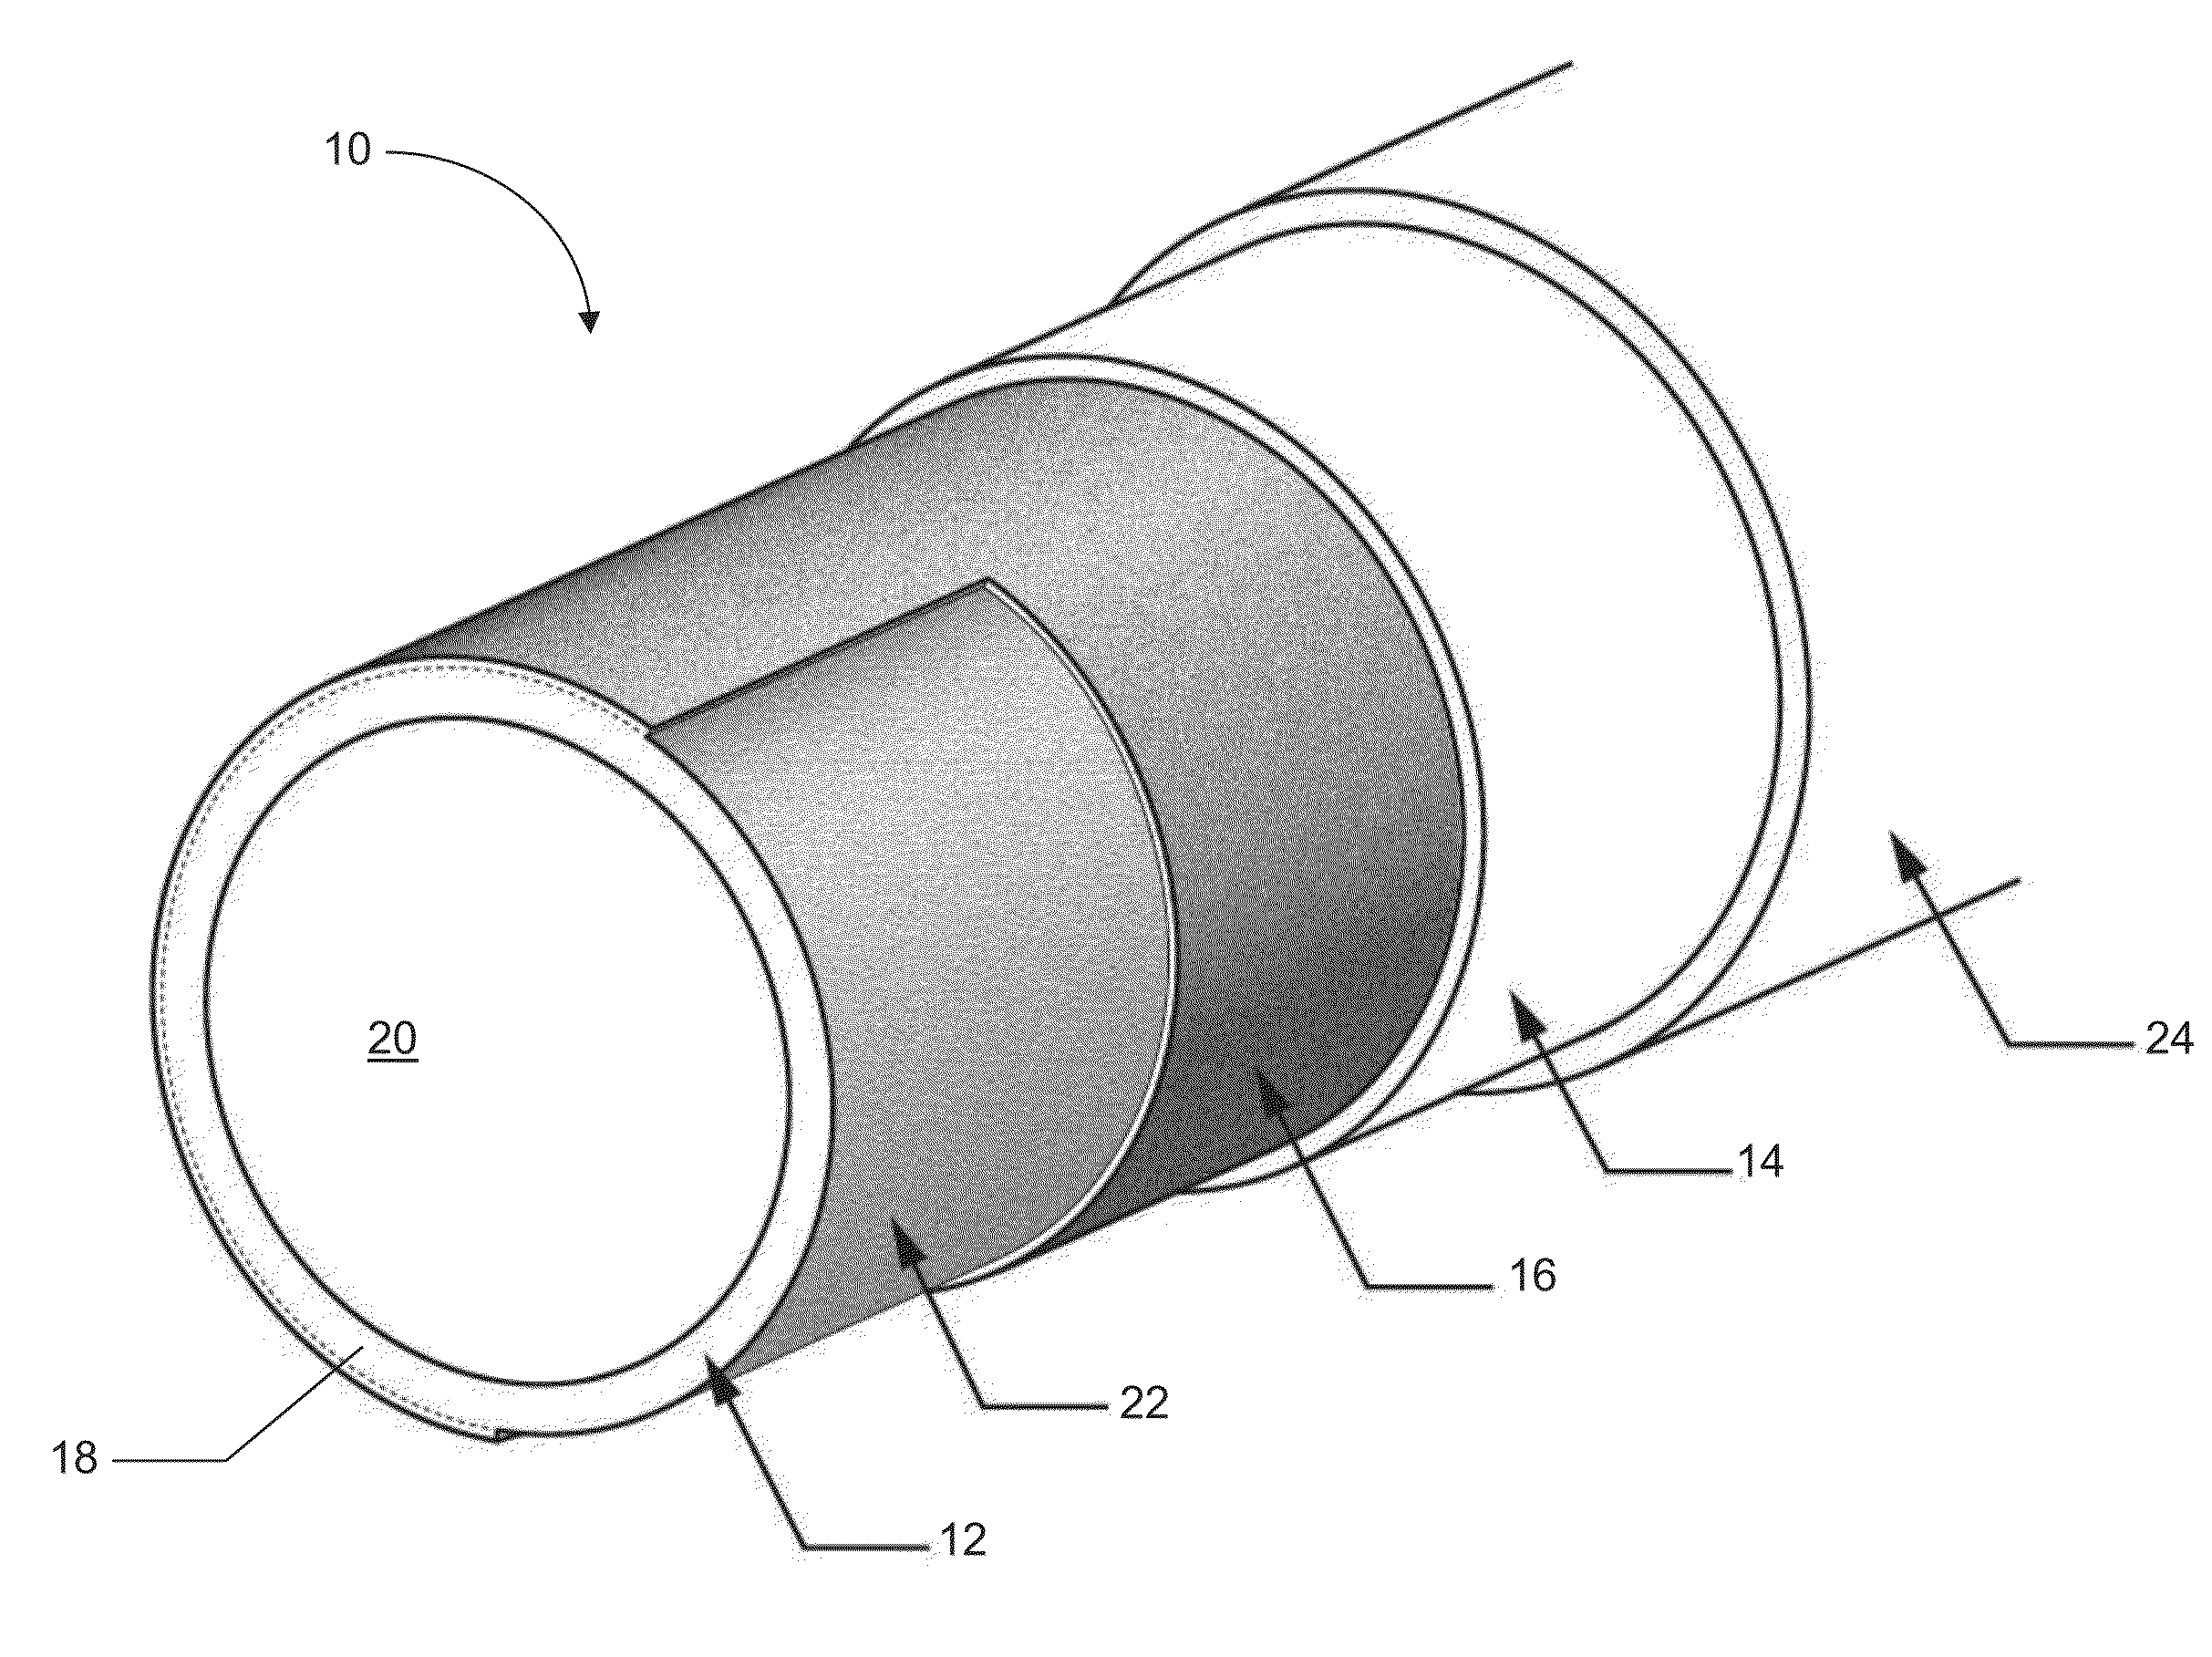 Thermoplastic extrusion with vapor barrier and surface sulfonation